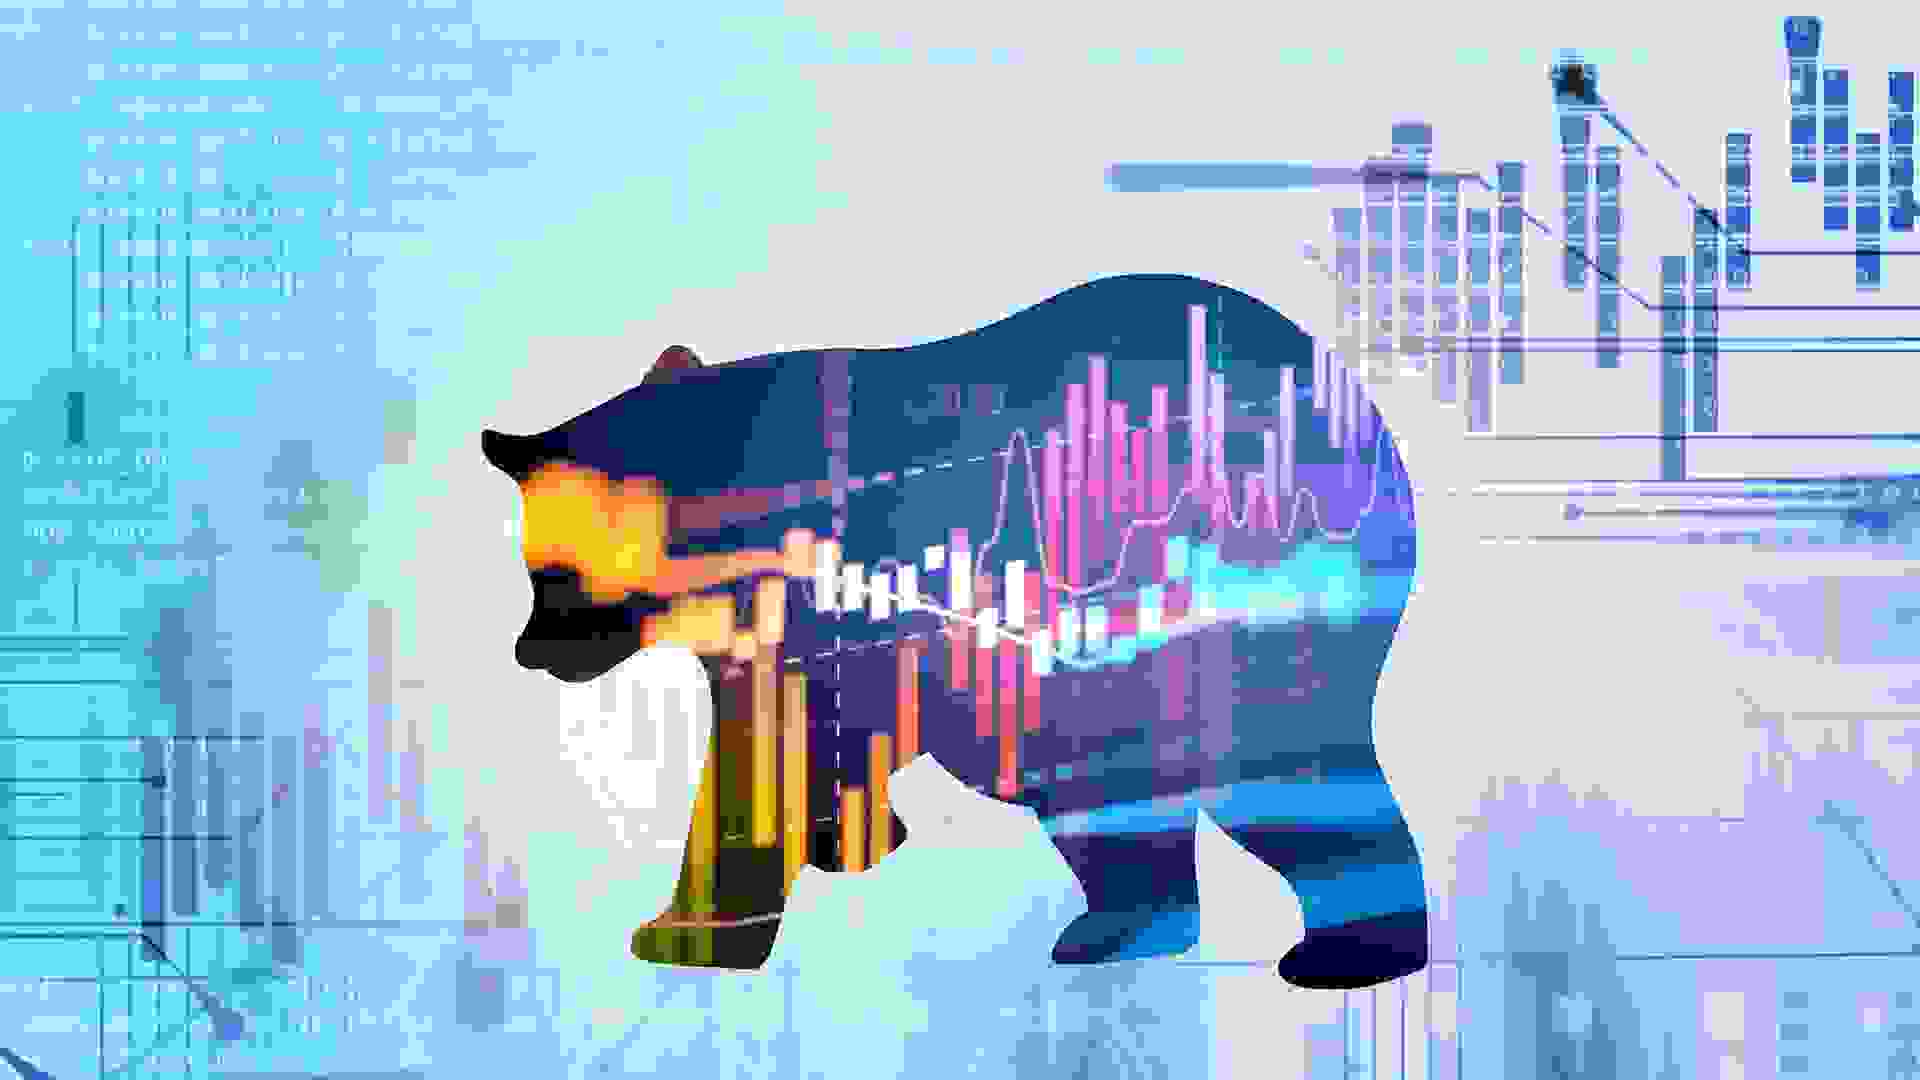 silhouette form of bear on financial stock market graph represent stock market crash or down trend investment.